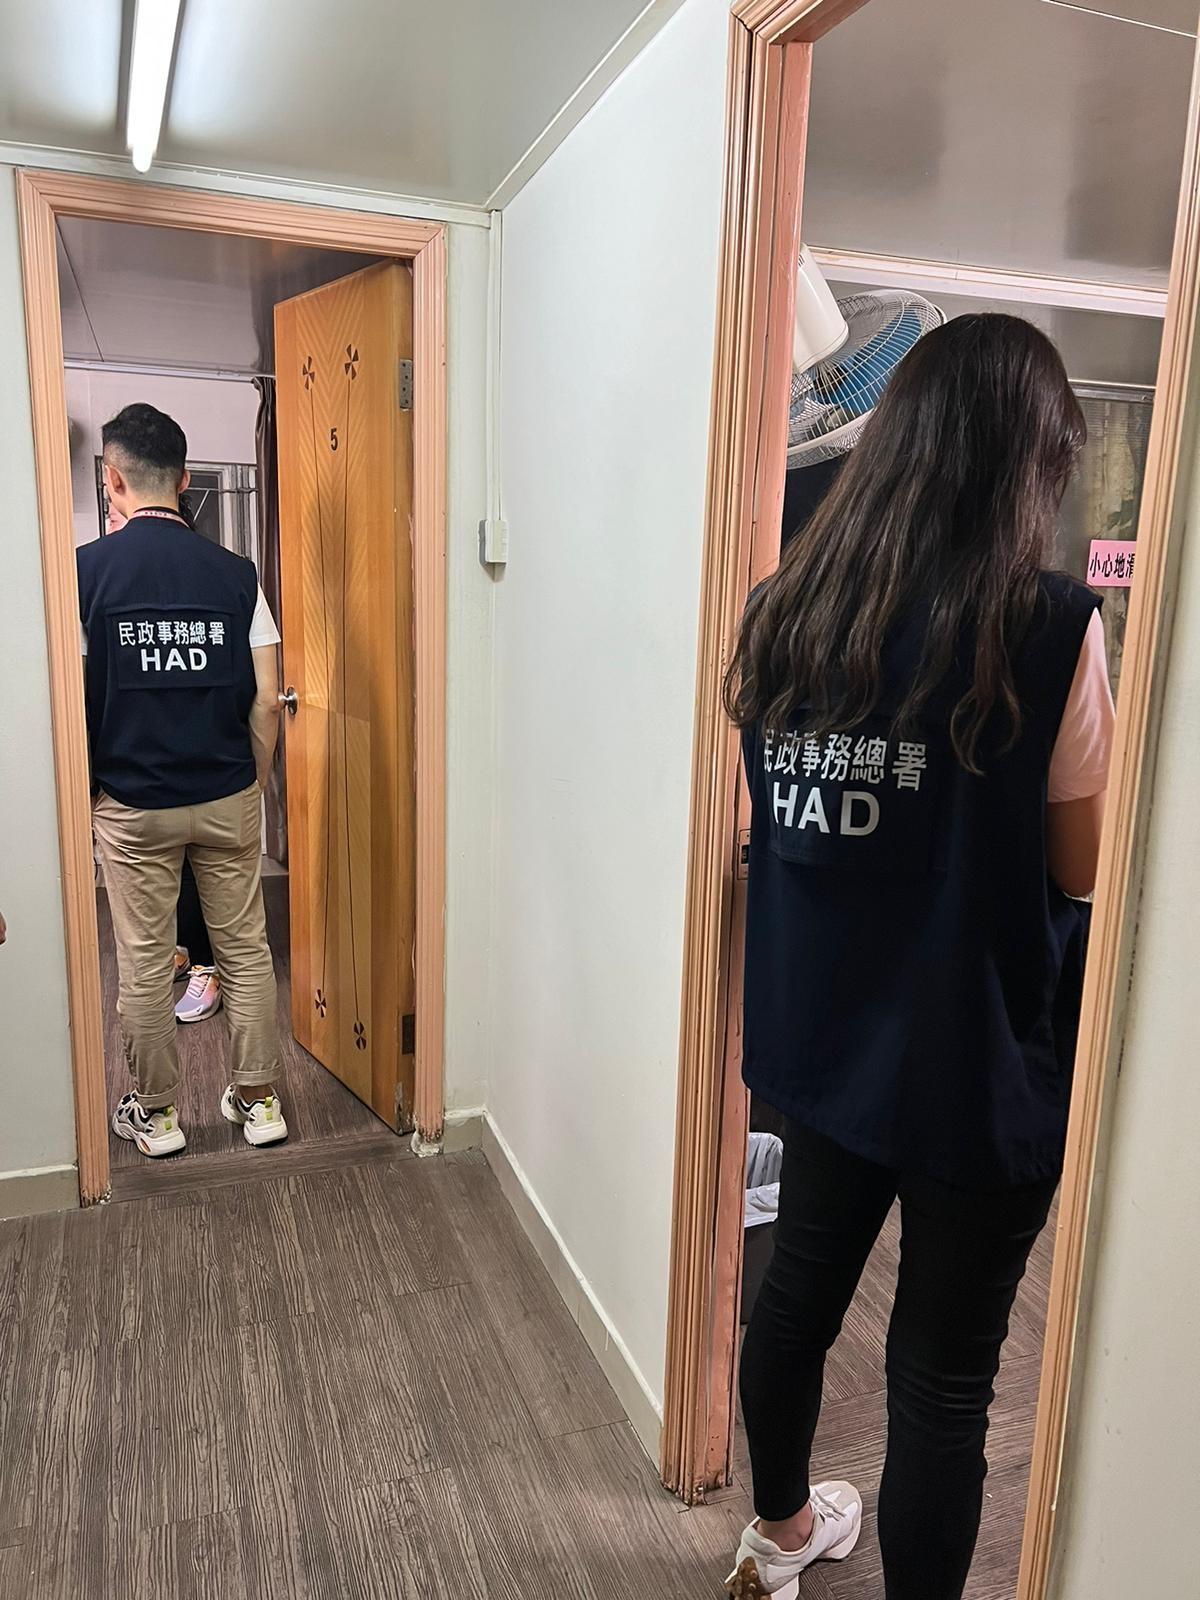 The Office of the Licensing Authority (OLA) of the Home Affairs Department yesterday (March 25) conducted a joint surprise operation with the Hong Kong Police Force to inspect one place of premises in Yuen Long District that was suspected of operating an unlicensed guesthouse. Photo shows OLA enforcement officers searching for evidence in a suspected unlicensed guesthouse.